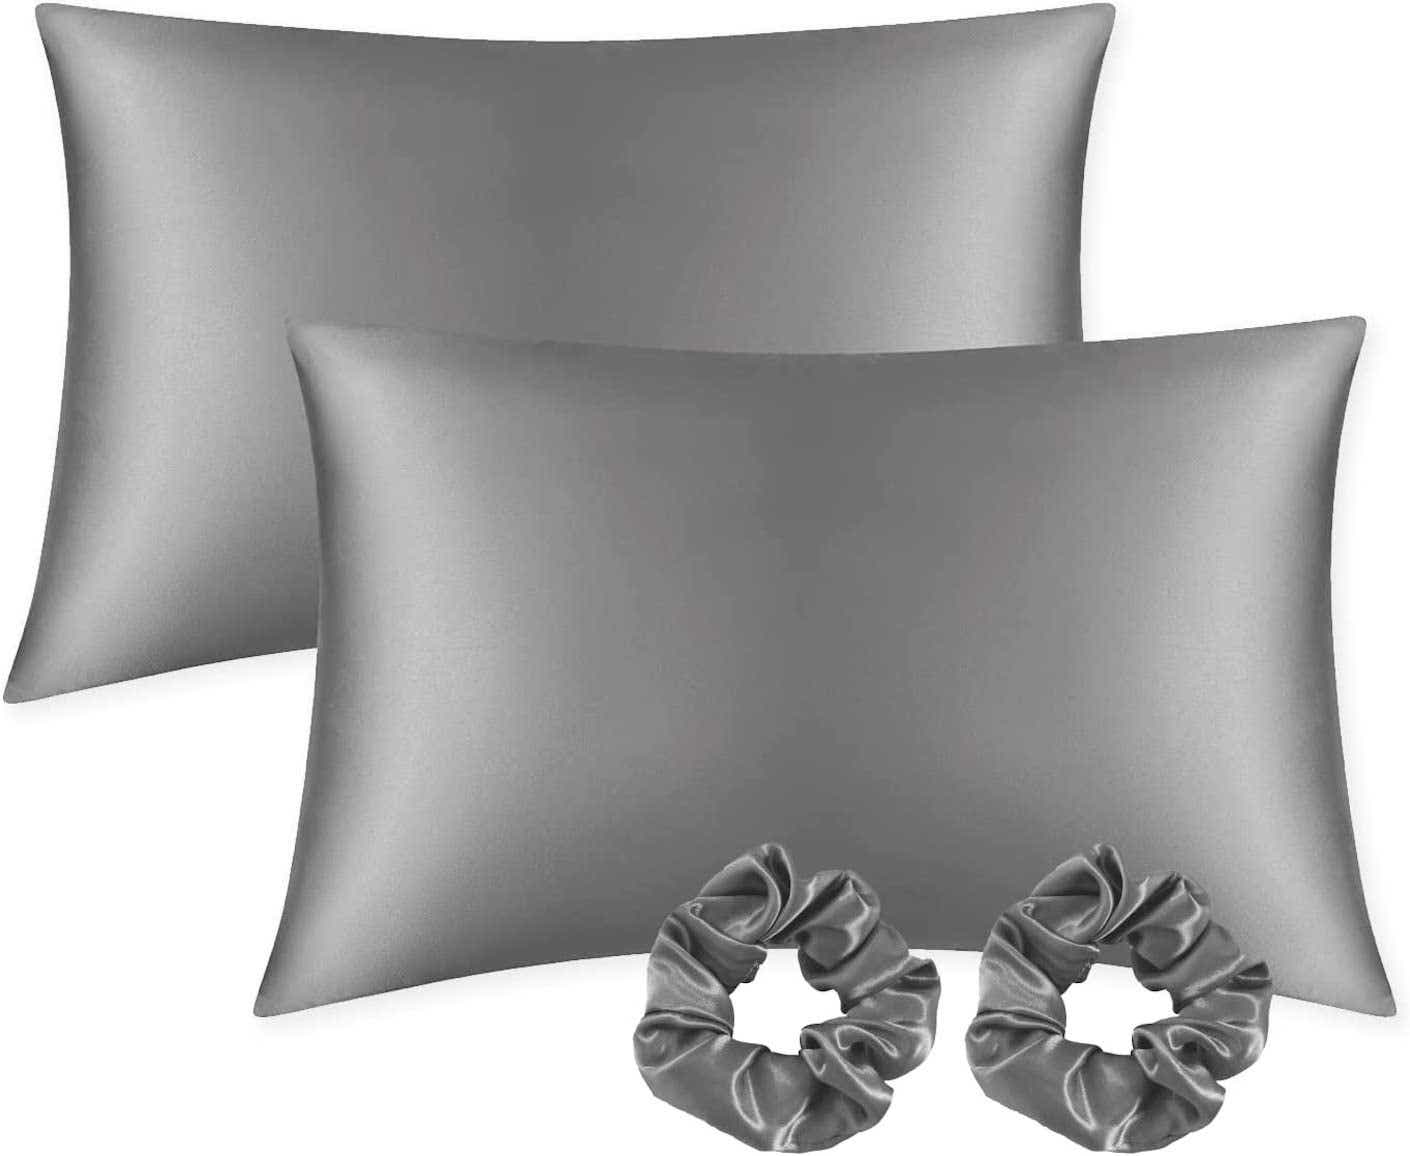 Two silver satin pillowcases stand alongside matching silver satin scrunchies.